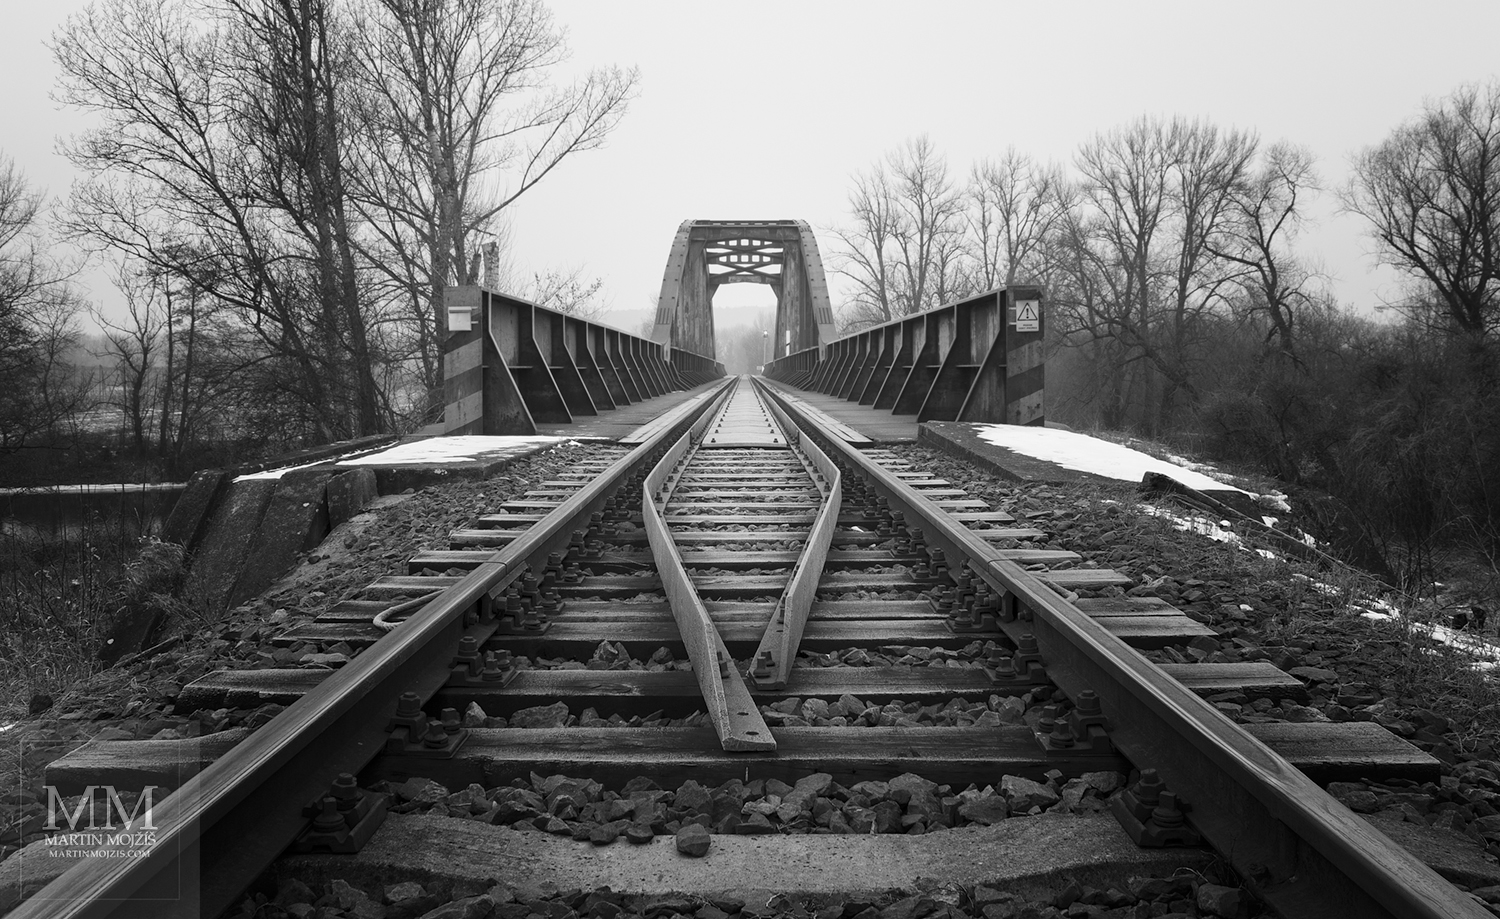 A close up view of the rails in front of the beginning of the bridge. Fine Art black and white photograph of Martin Mojzis with the title IN FRONT OF THE BRIDGE.